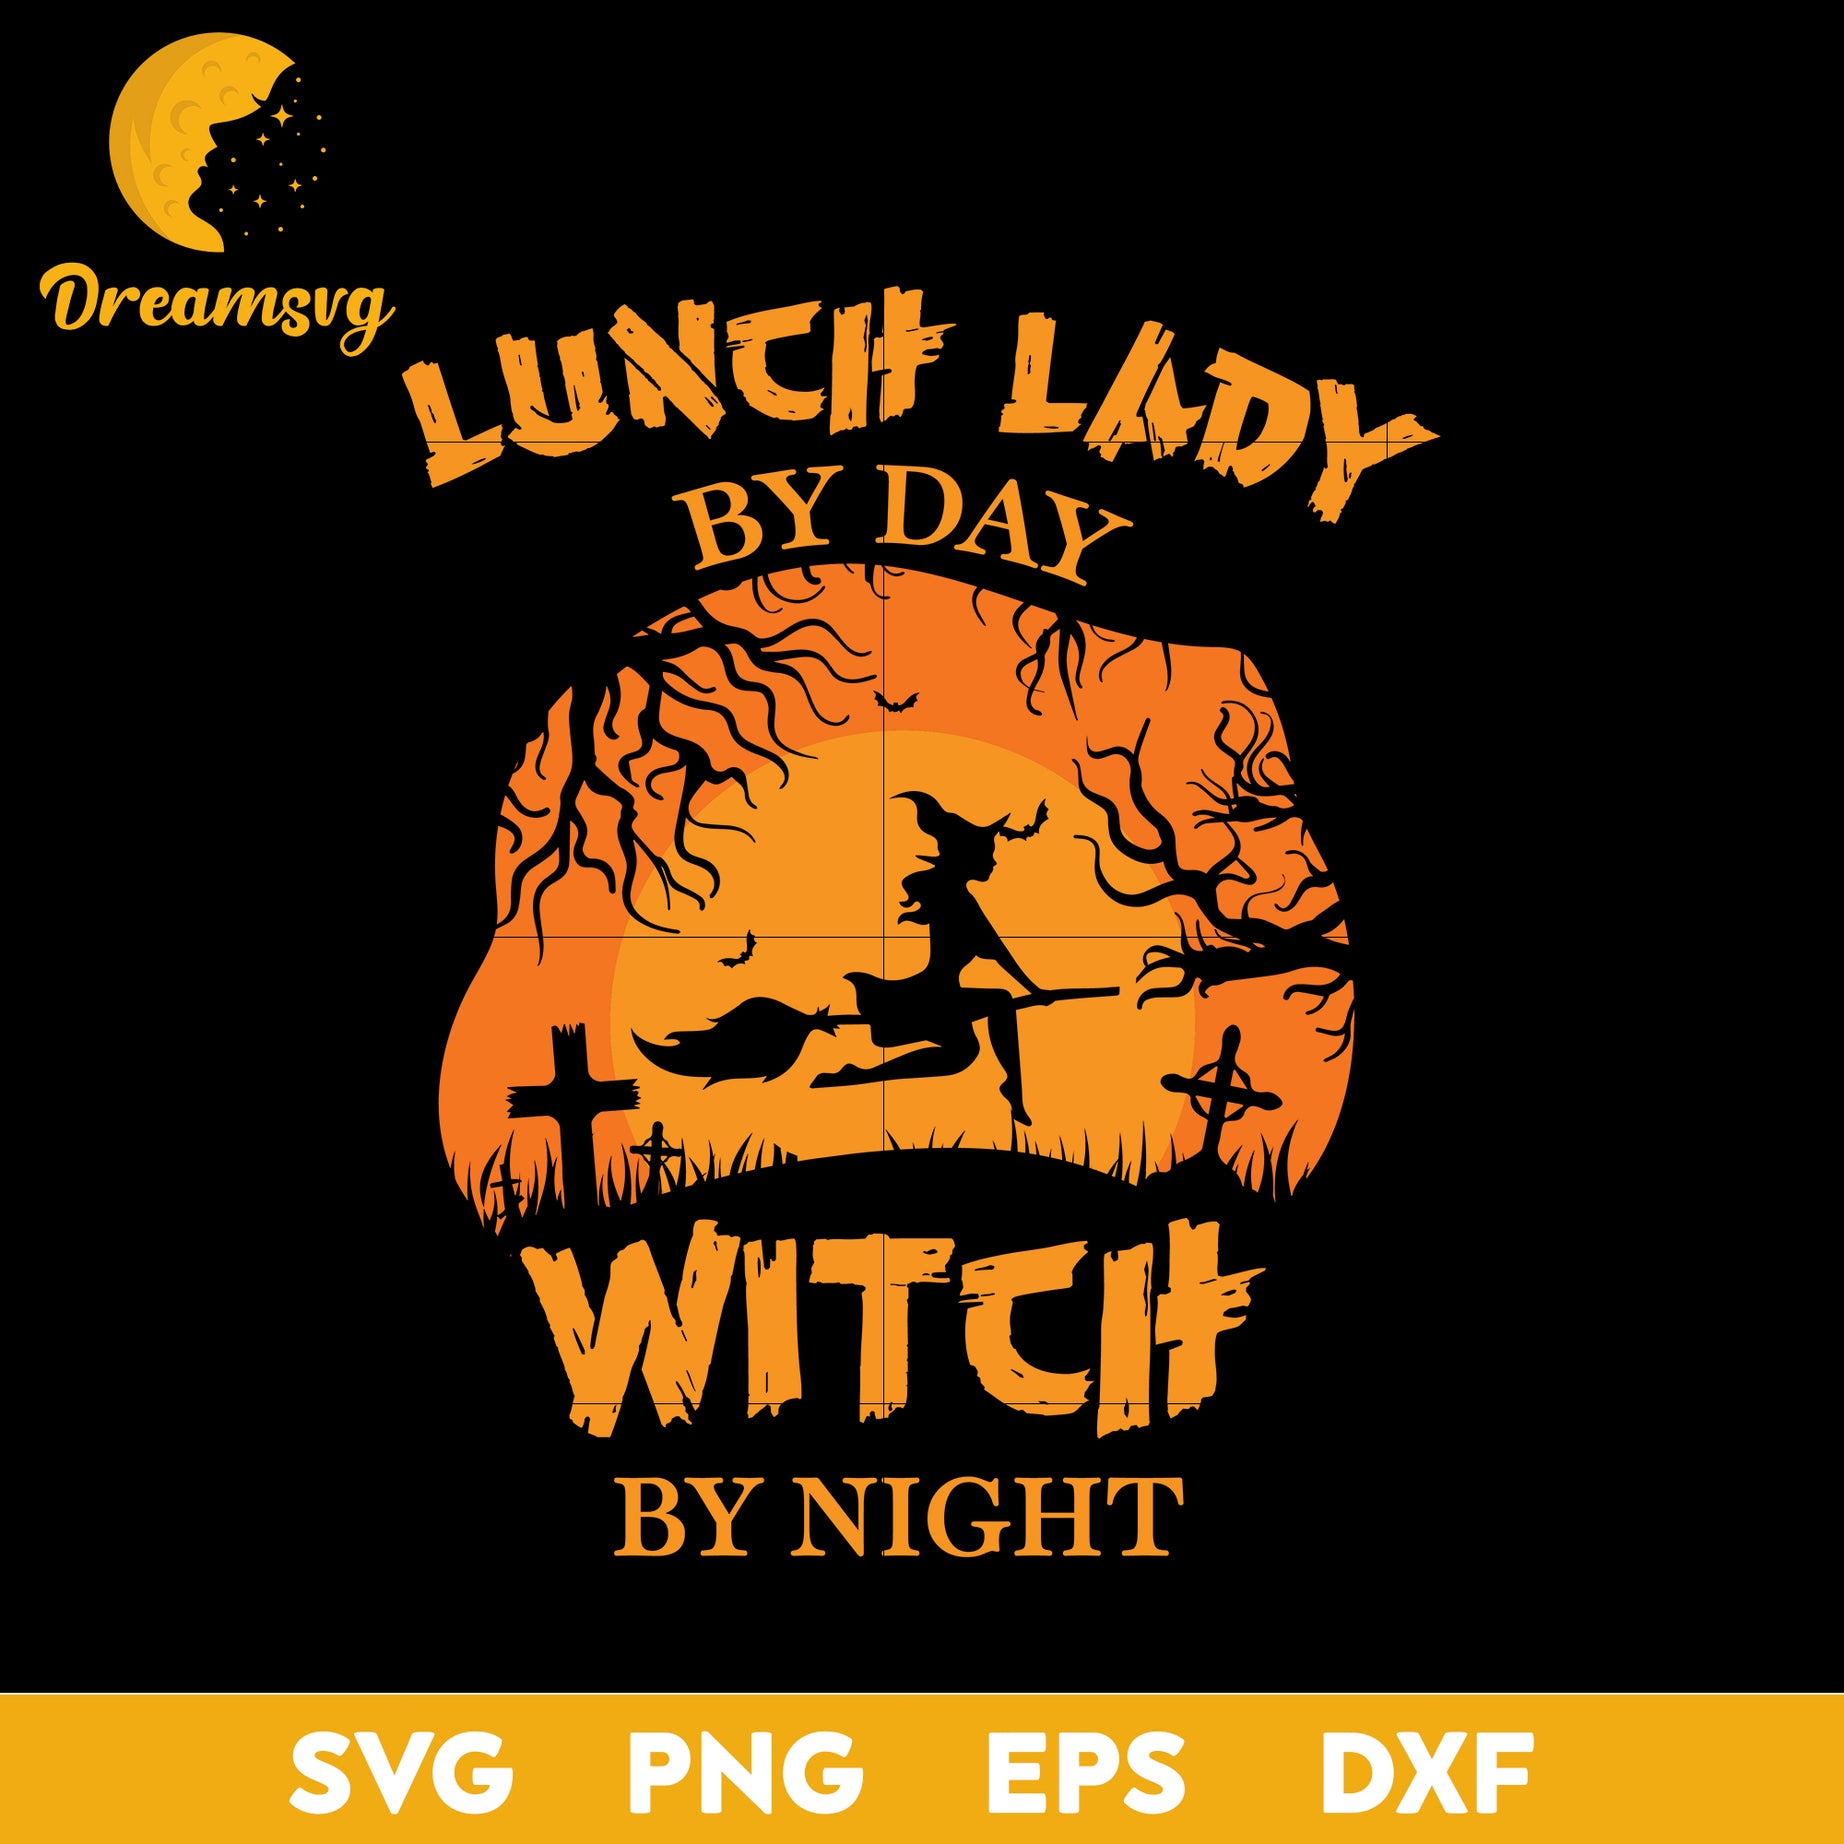 Lunch lady by day witch by night svg, Halloween svg, png, dxf, eps digital file.